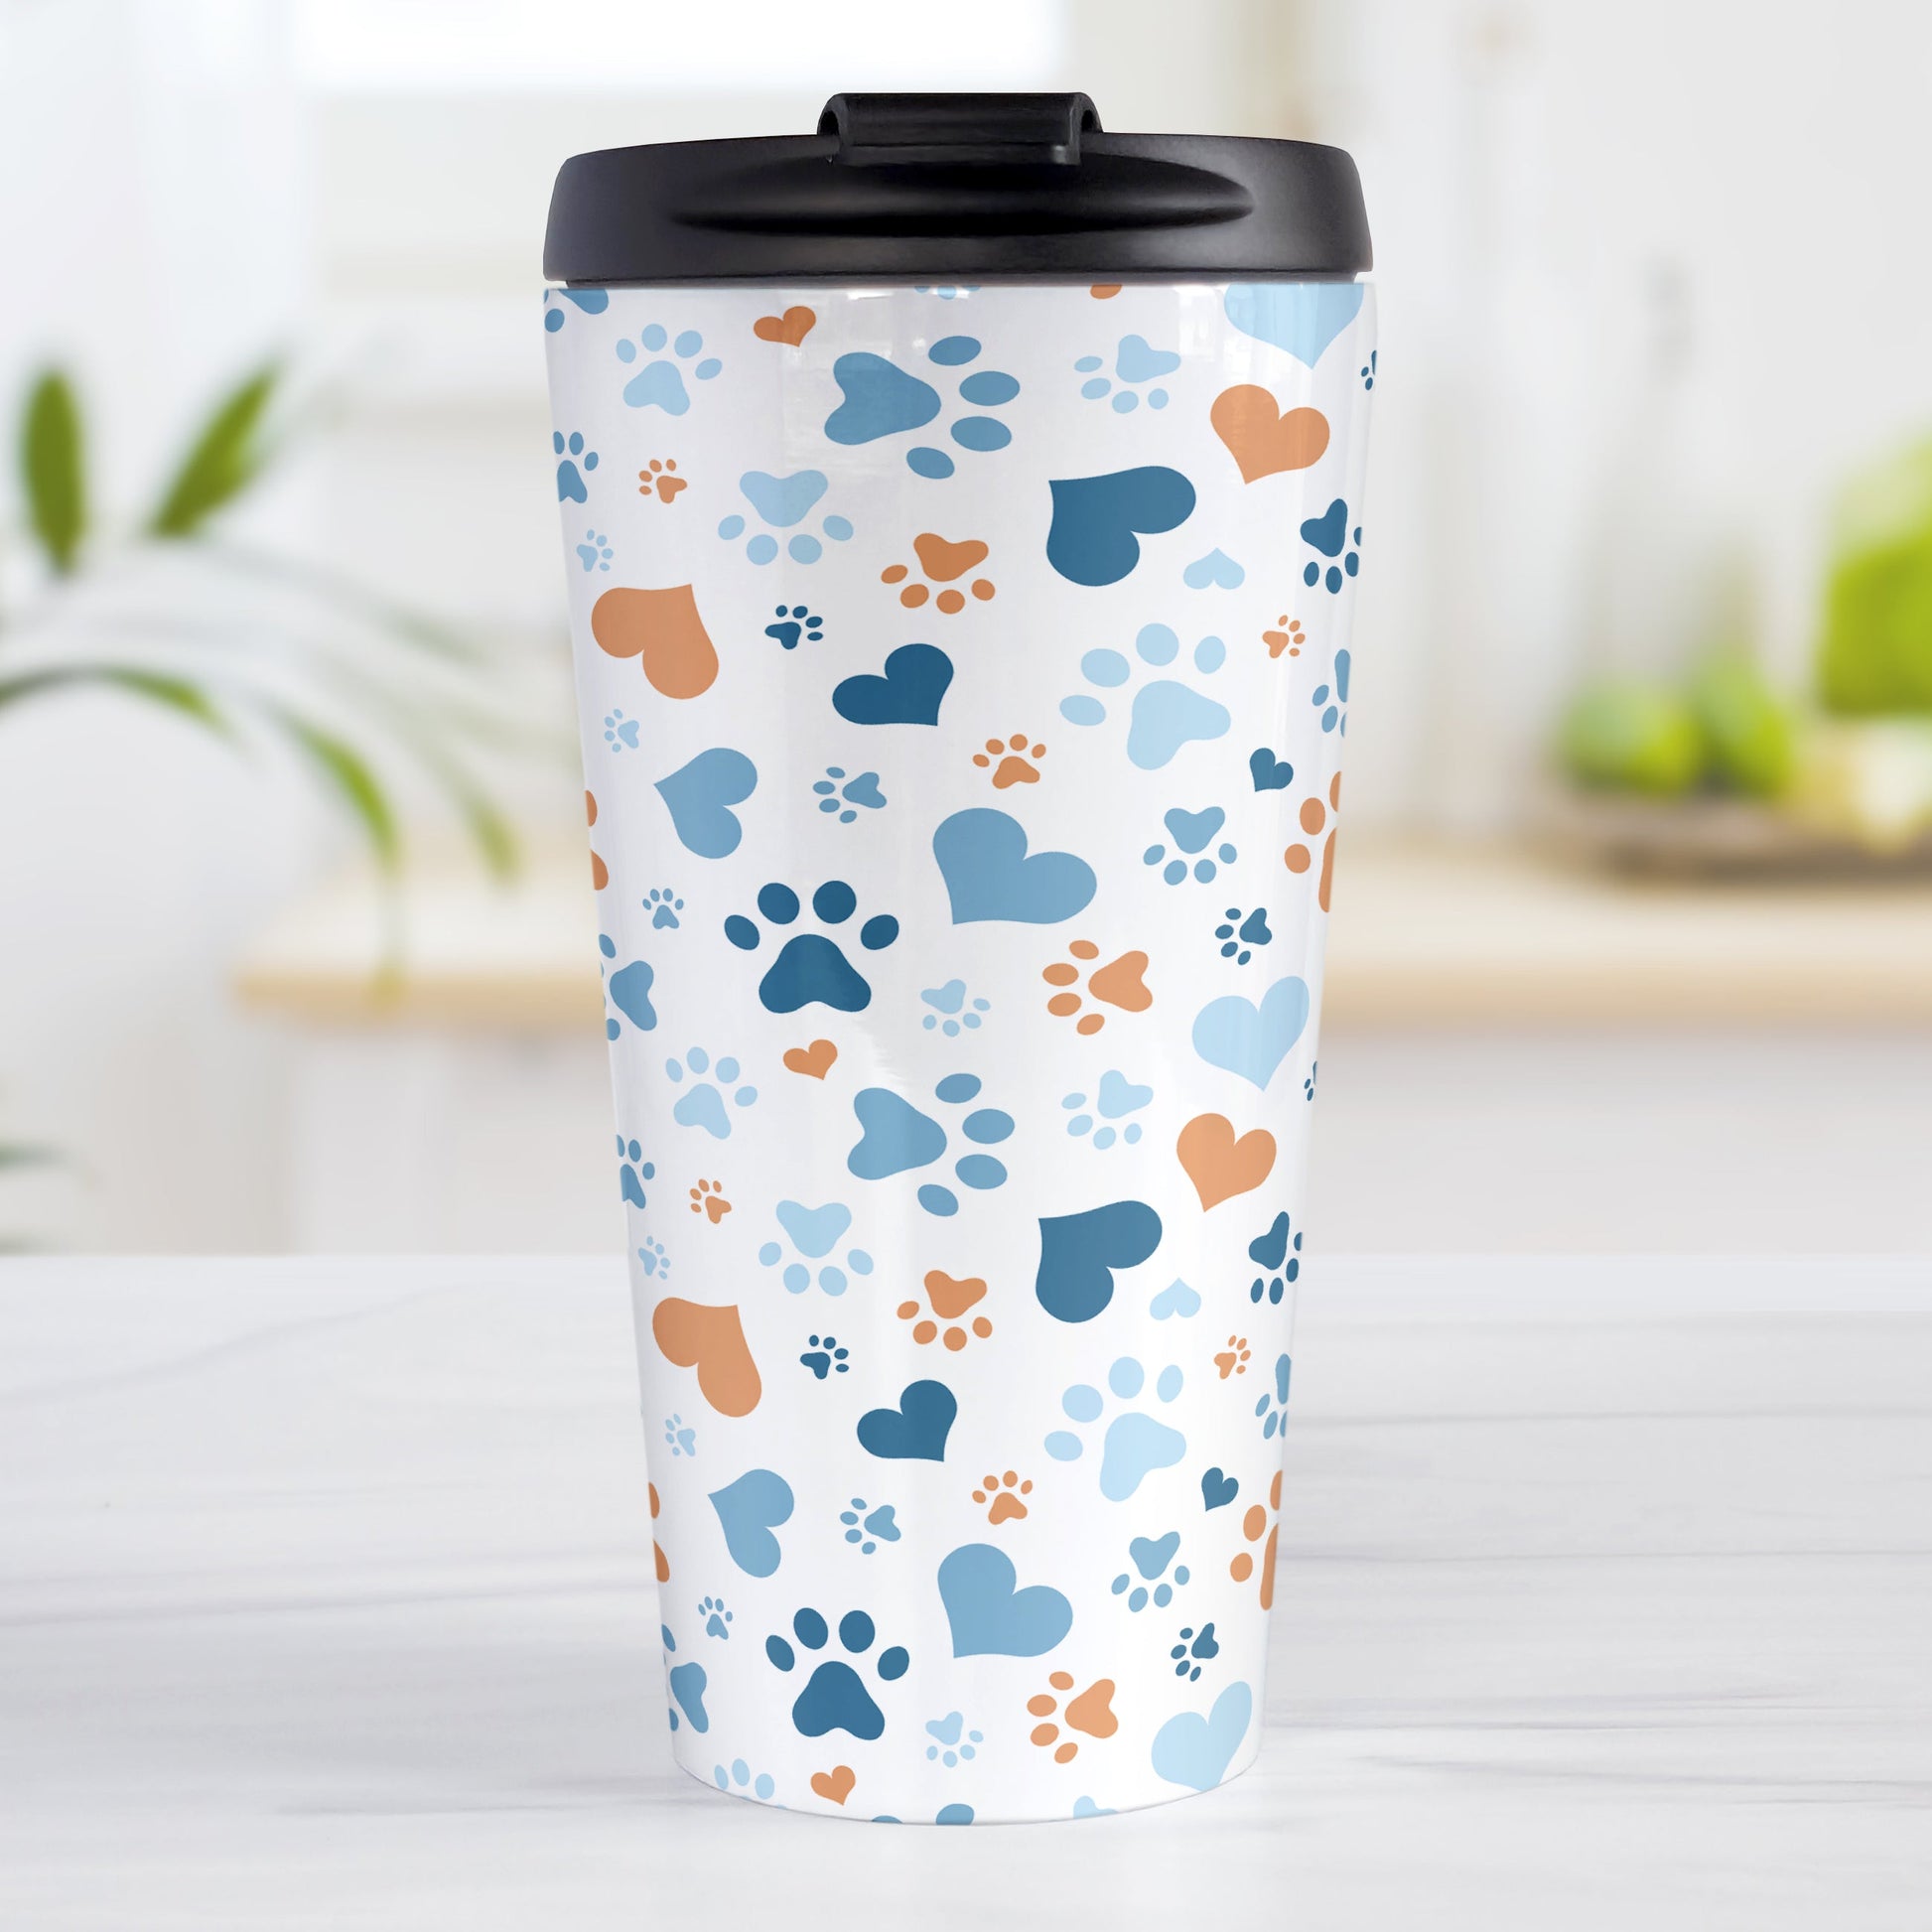 Blue Hearts and Paw Prints Travel Mug (15oz) at Amy's Coffee Mugs. A stainless steel travel mug designed with a pattern of hearts and paw prints in orange and different shades of blue that wraps around the mug. This travel mug is perfect for people love dogs and cute paw print designs.